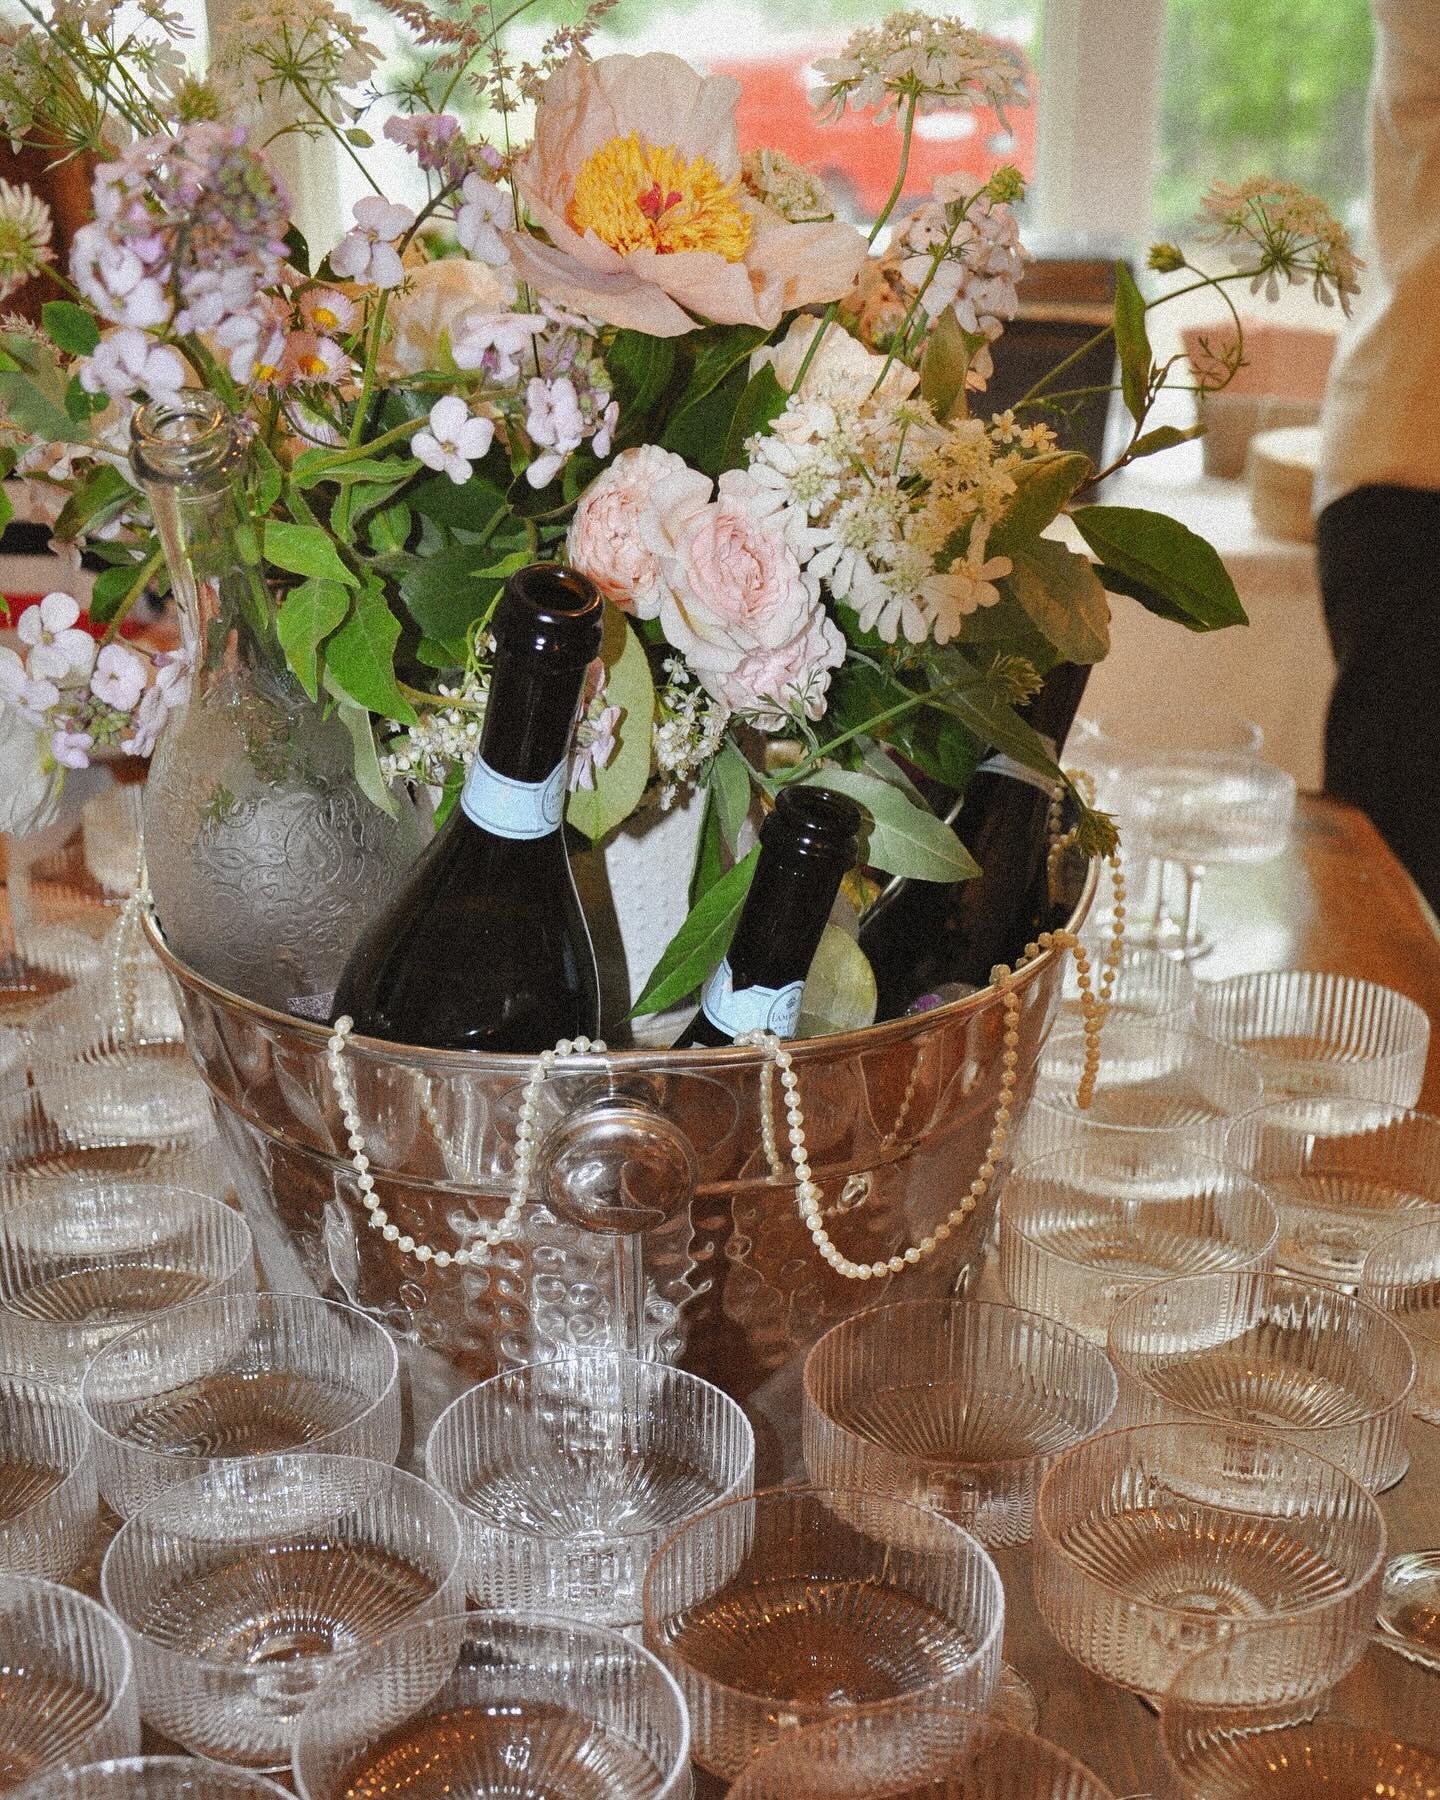 I&rsquo;m here for the WOW factor when it comes to centerpieces! 🍾

This centerpiece consists of custom floral ice cubes, a beautiful floral arrangement, pearl ribbon, and the biggest hit of the party, the elegant champagne coupes.